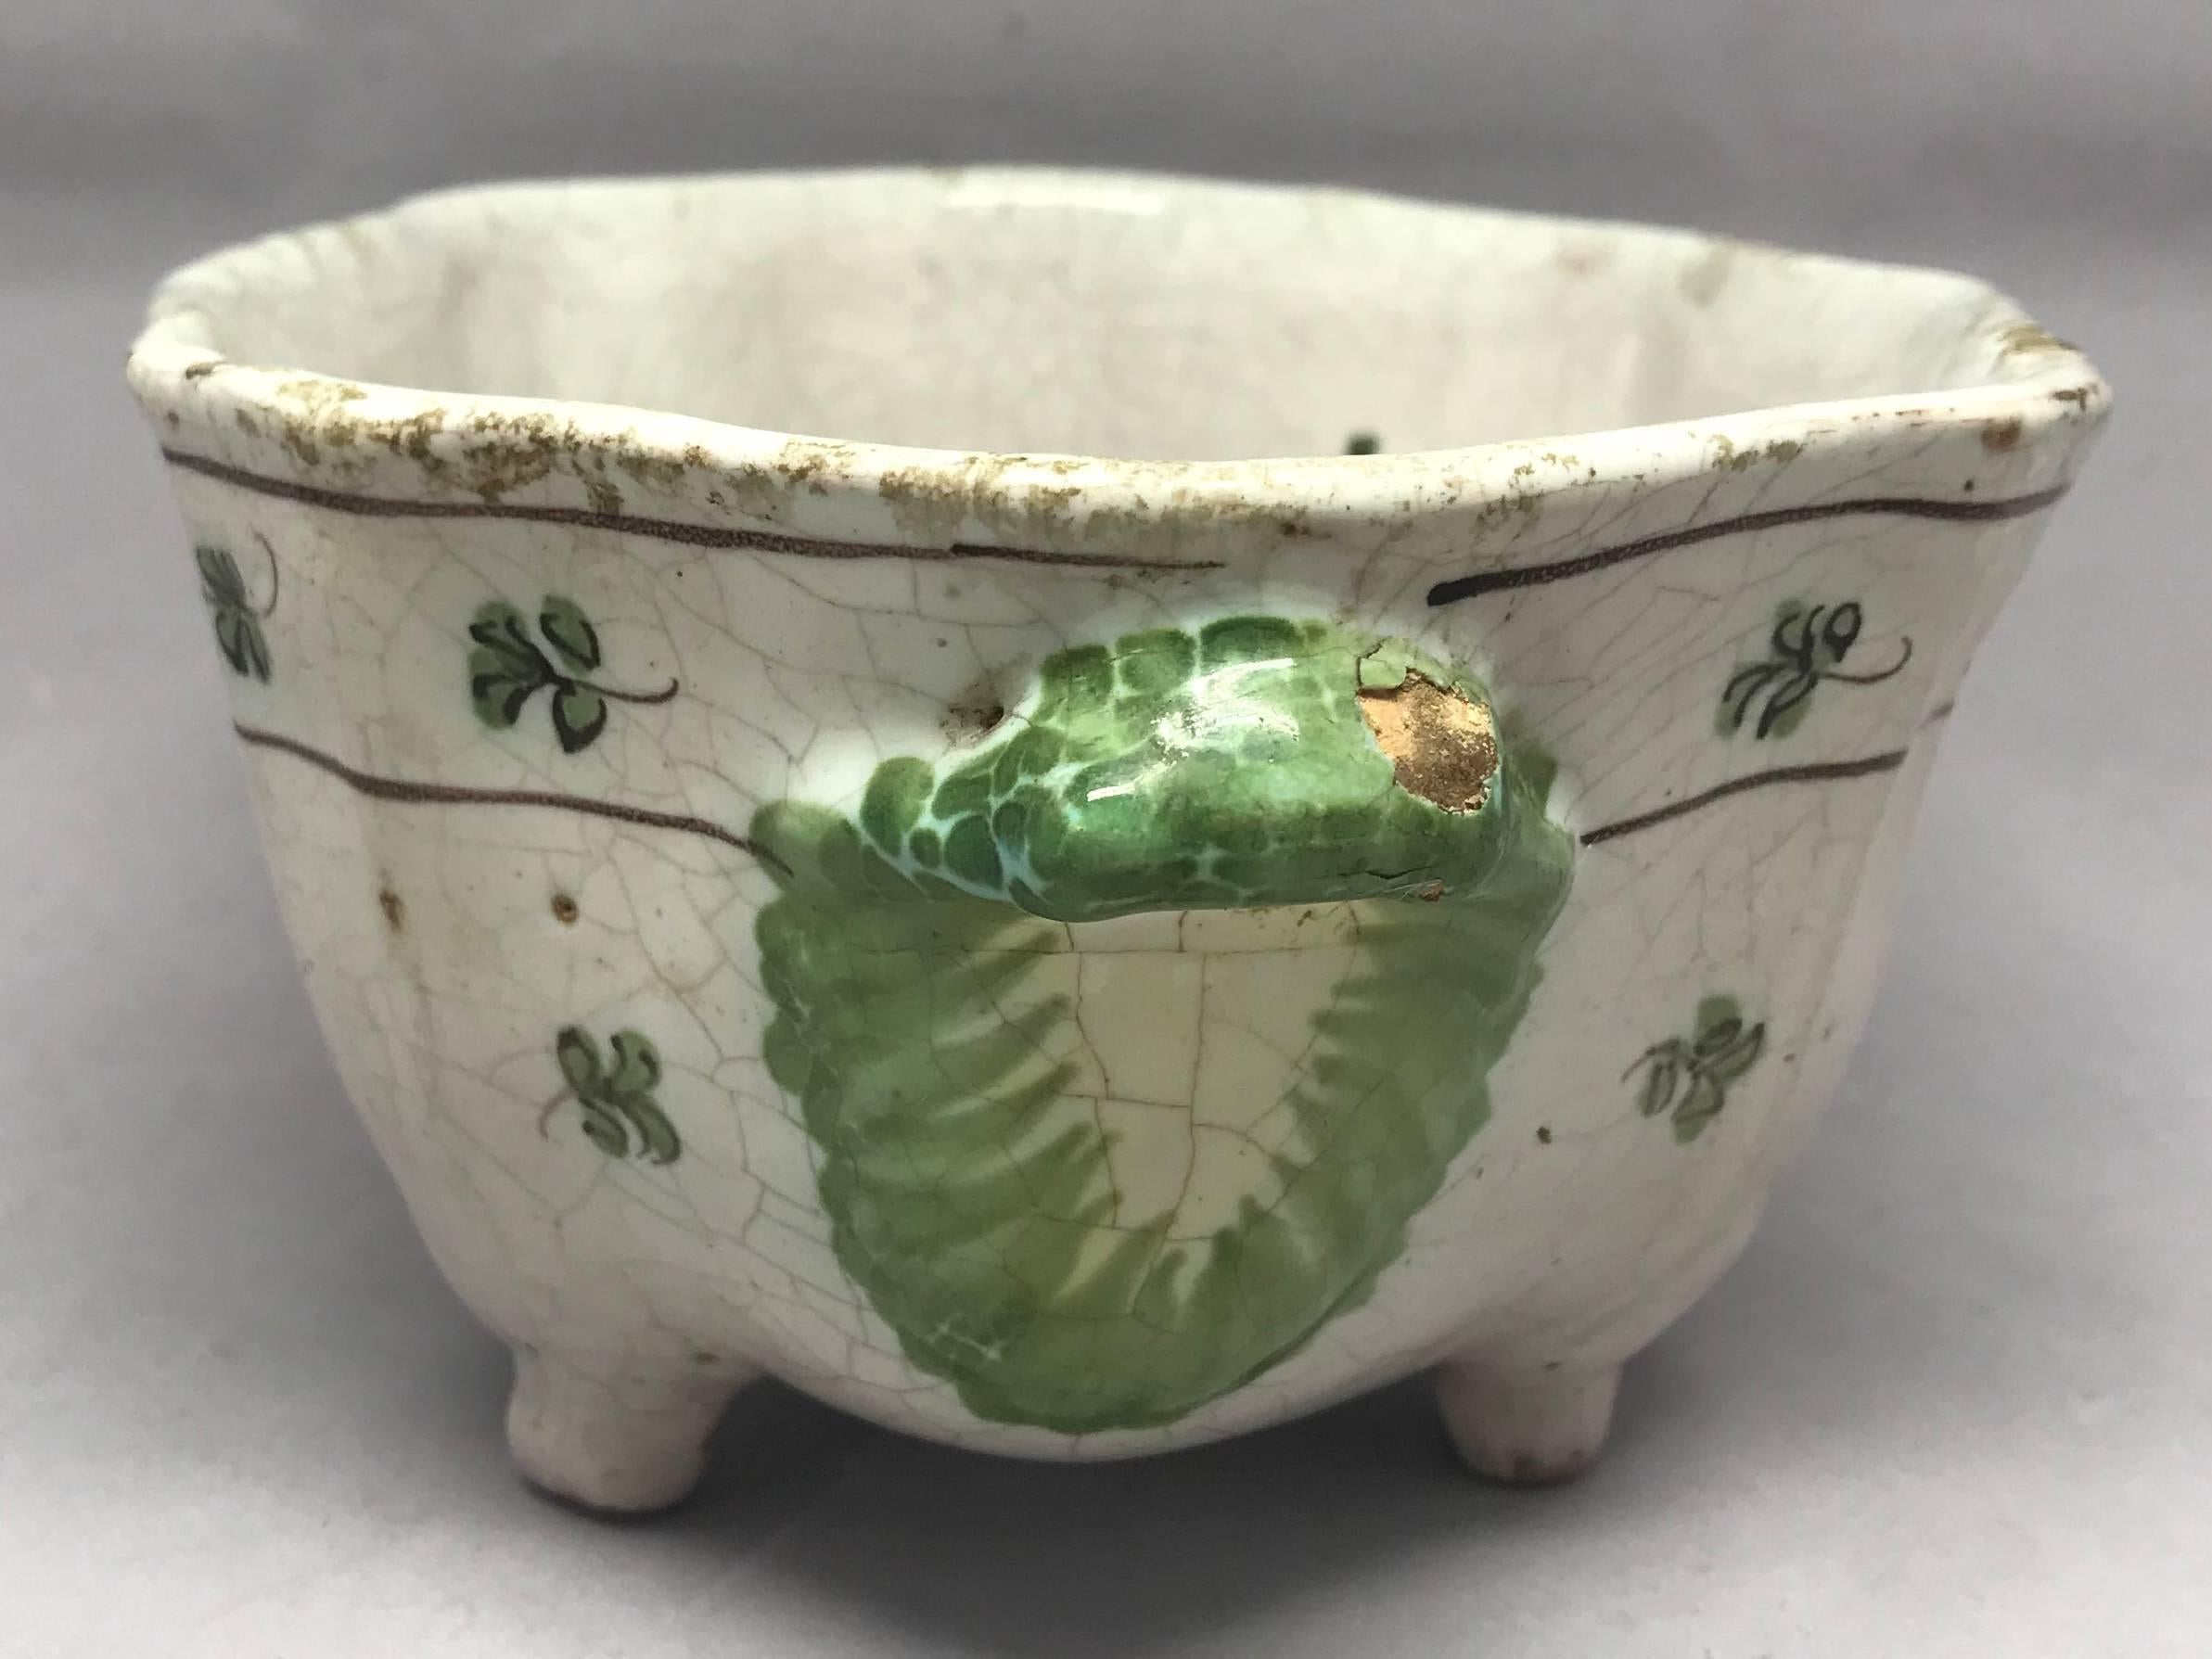 Cerreto majolica shaped bird bowl. A glazed faience majolica shaped and footed bowl with green, yellow and blue accents featuring a bird amongst foliage to both sides with green leaf handles and a floral banded border from the Cerreto Sannita